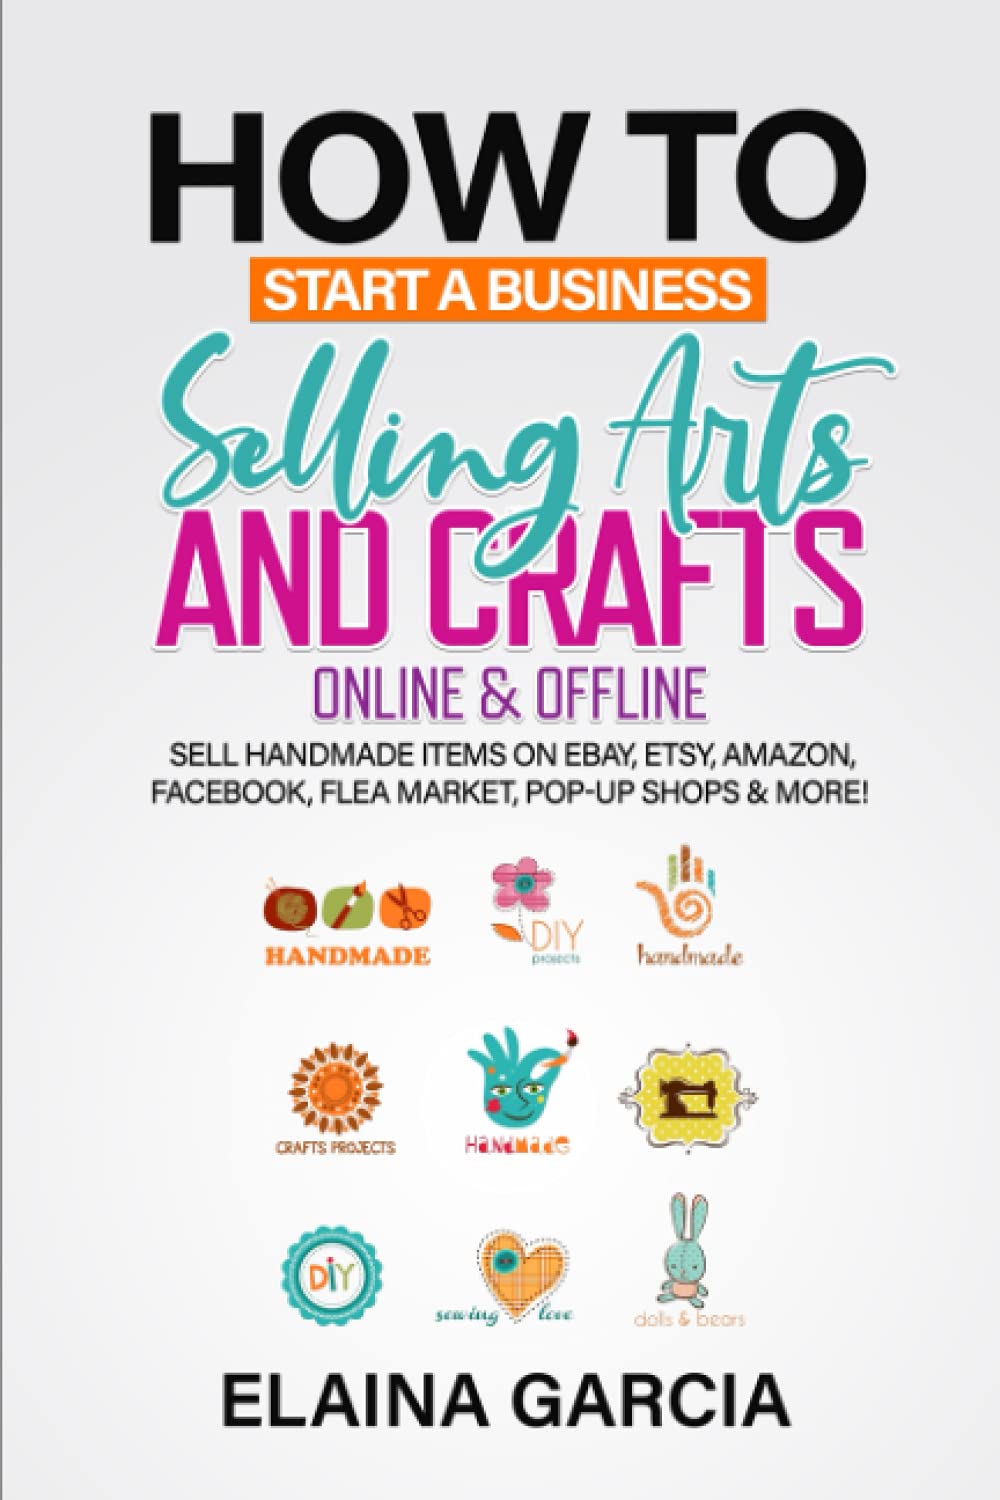 How to Start a Business Selling Arts and Crafts Online & Offline: Sell Handmade Items on eBay, Etsy, Amazon, Facebook, Flea Market, Pop-Up Shops & More!